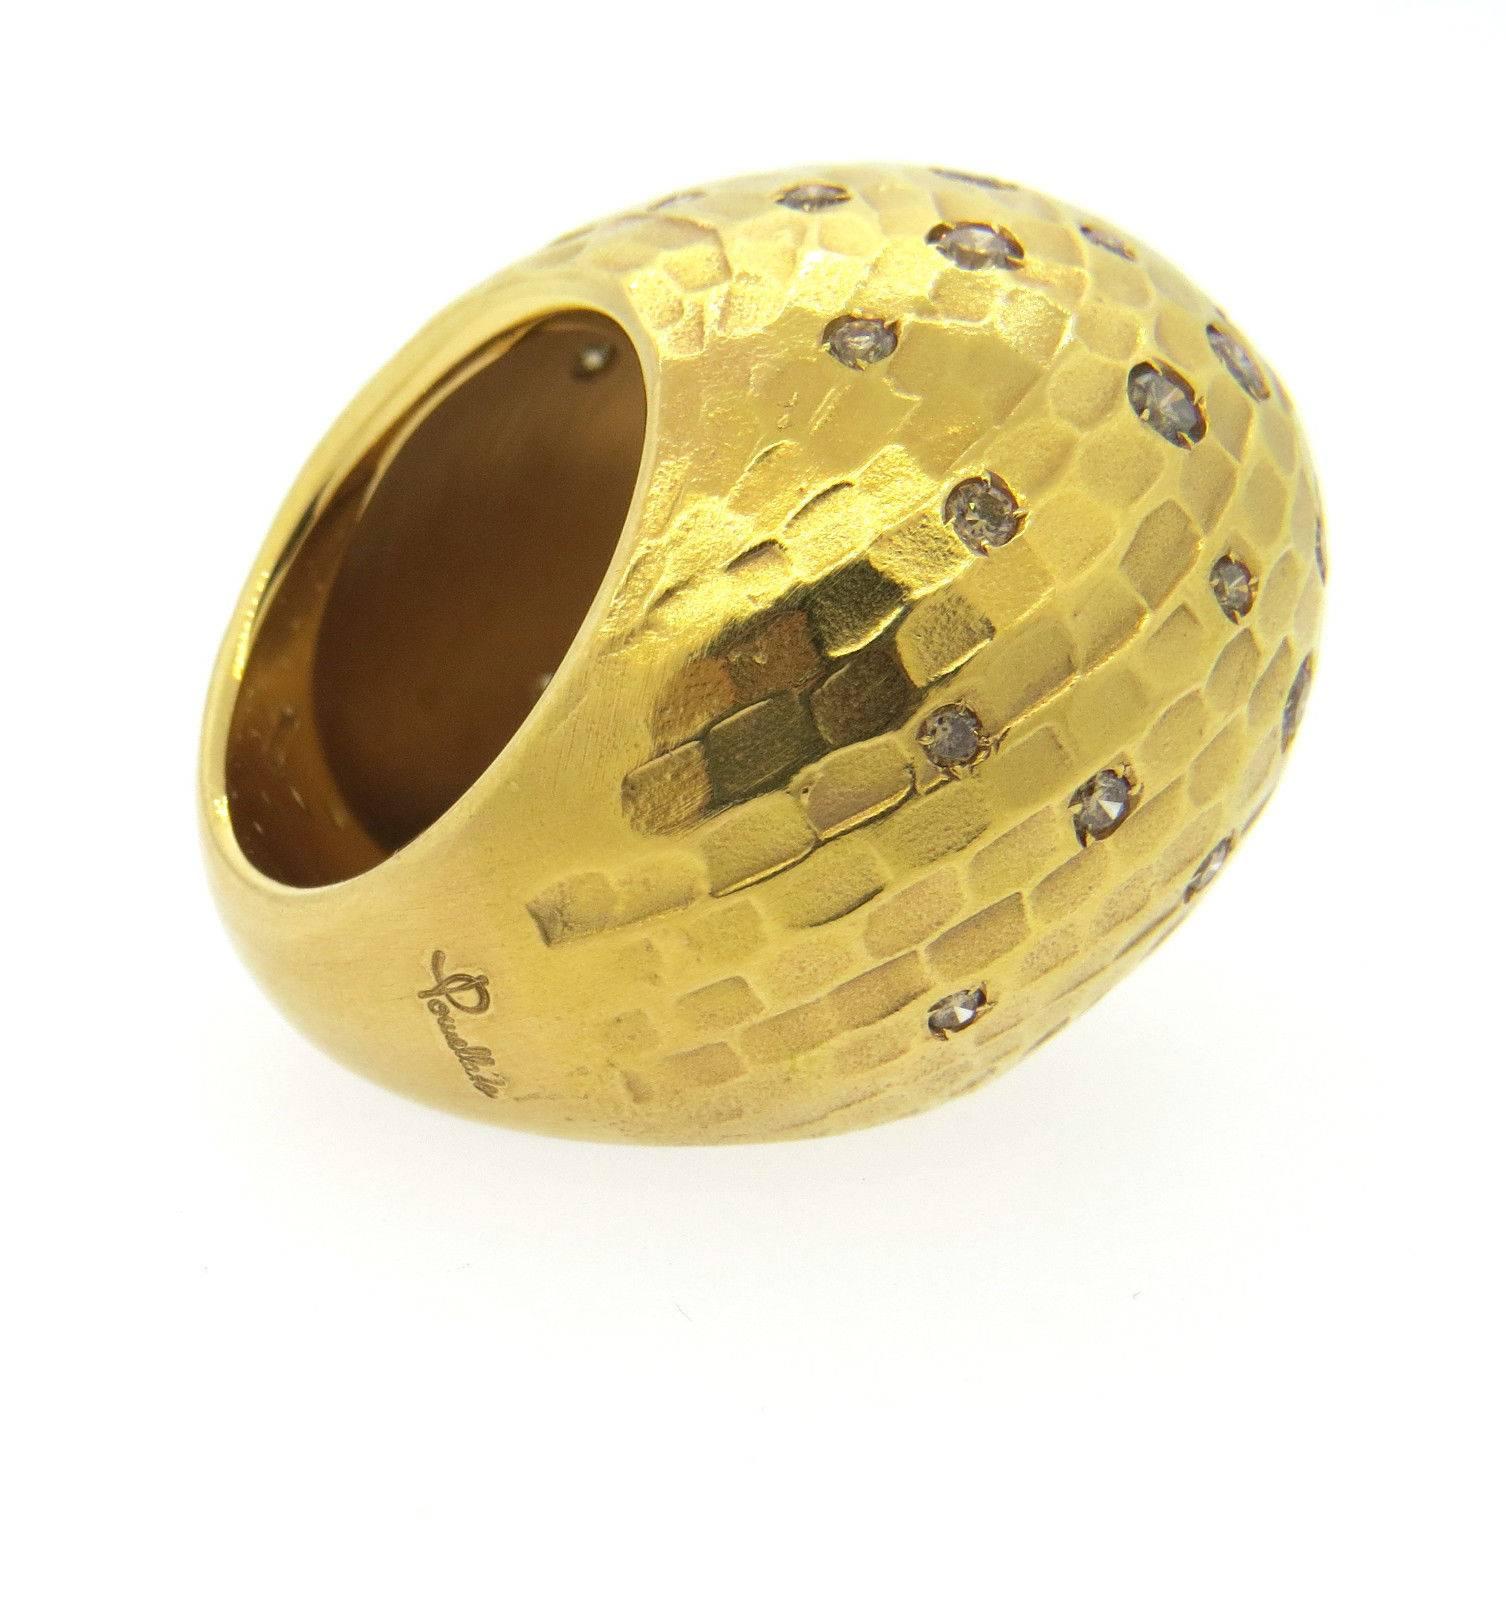 Large 18k yellow gold dome ring, crafted by Pomellato for Duna collection, decorated with approximately 1.56ctw in brown diamonds. The ring is a size 6.5- 7.  The Top of the ring is 26mm wide and sits 18mm from the finger. Weight of the piece - 40.9